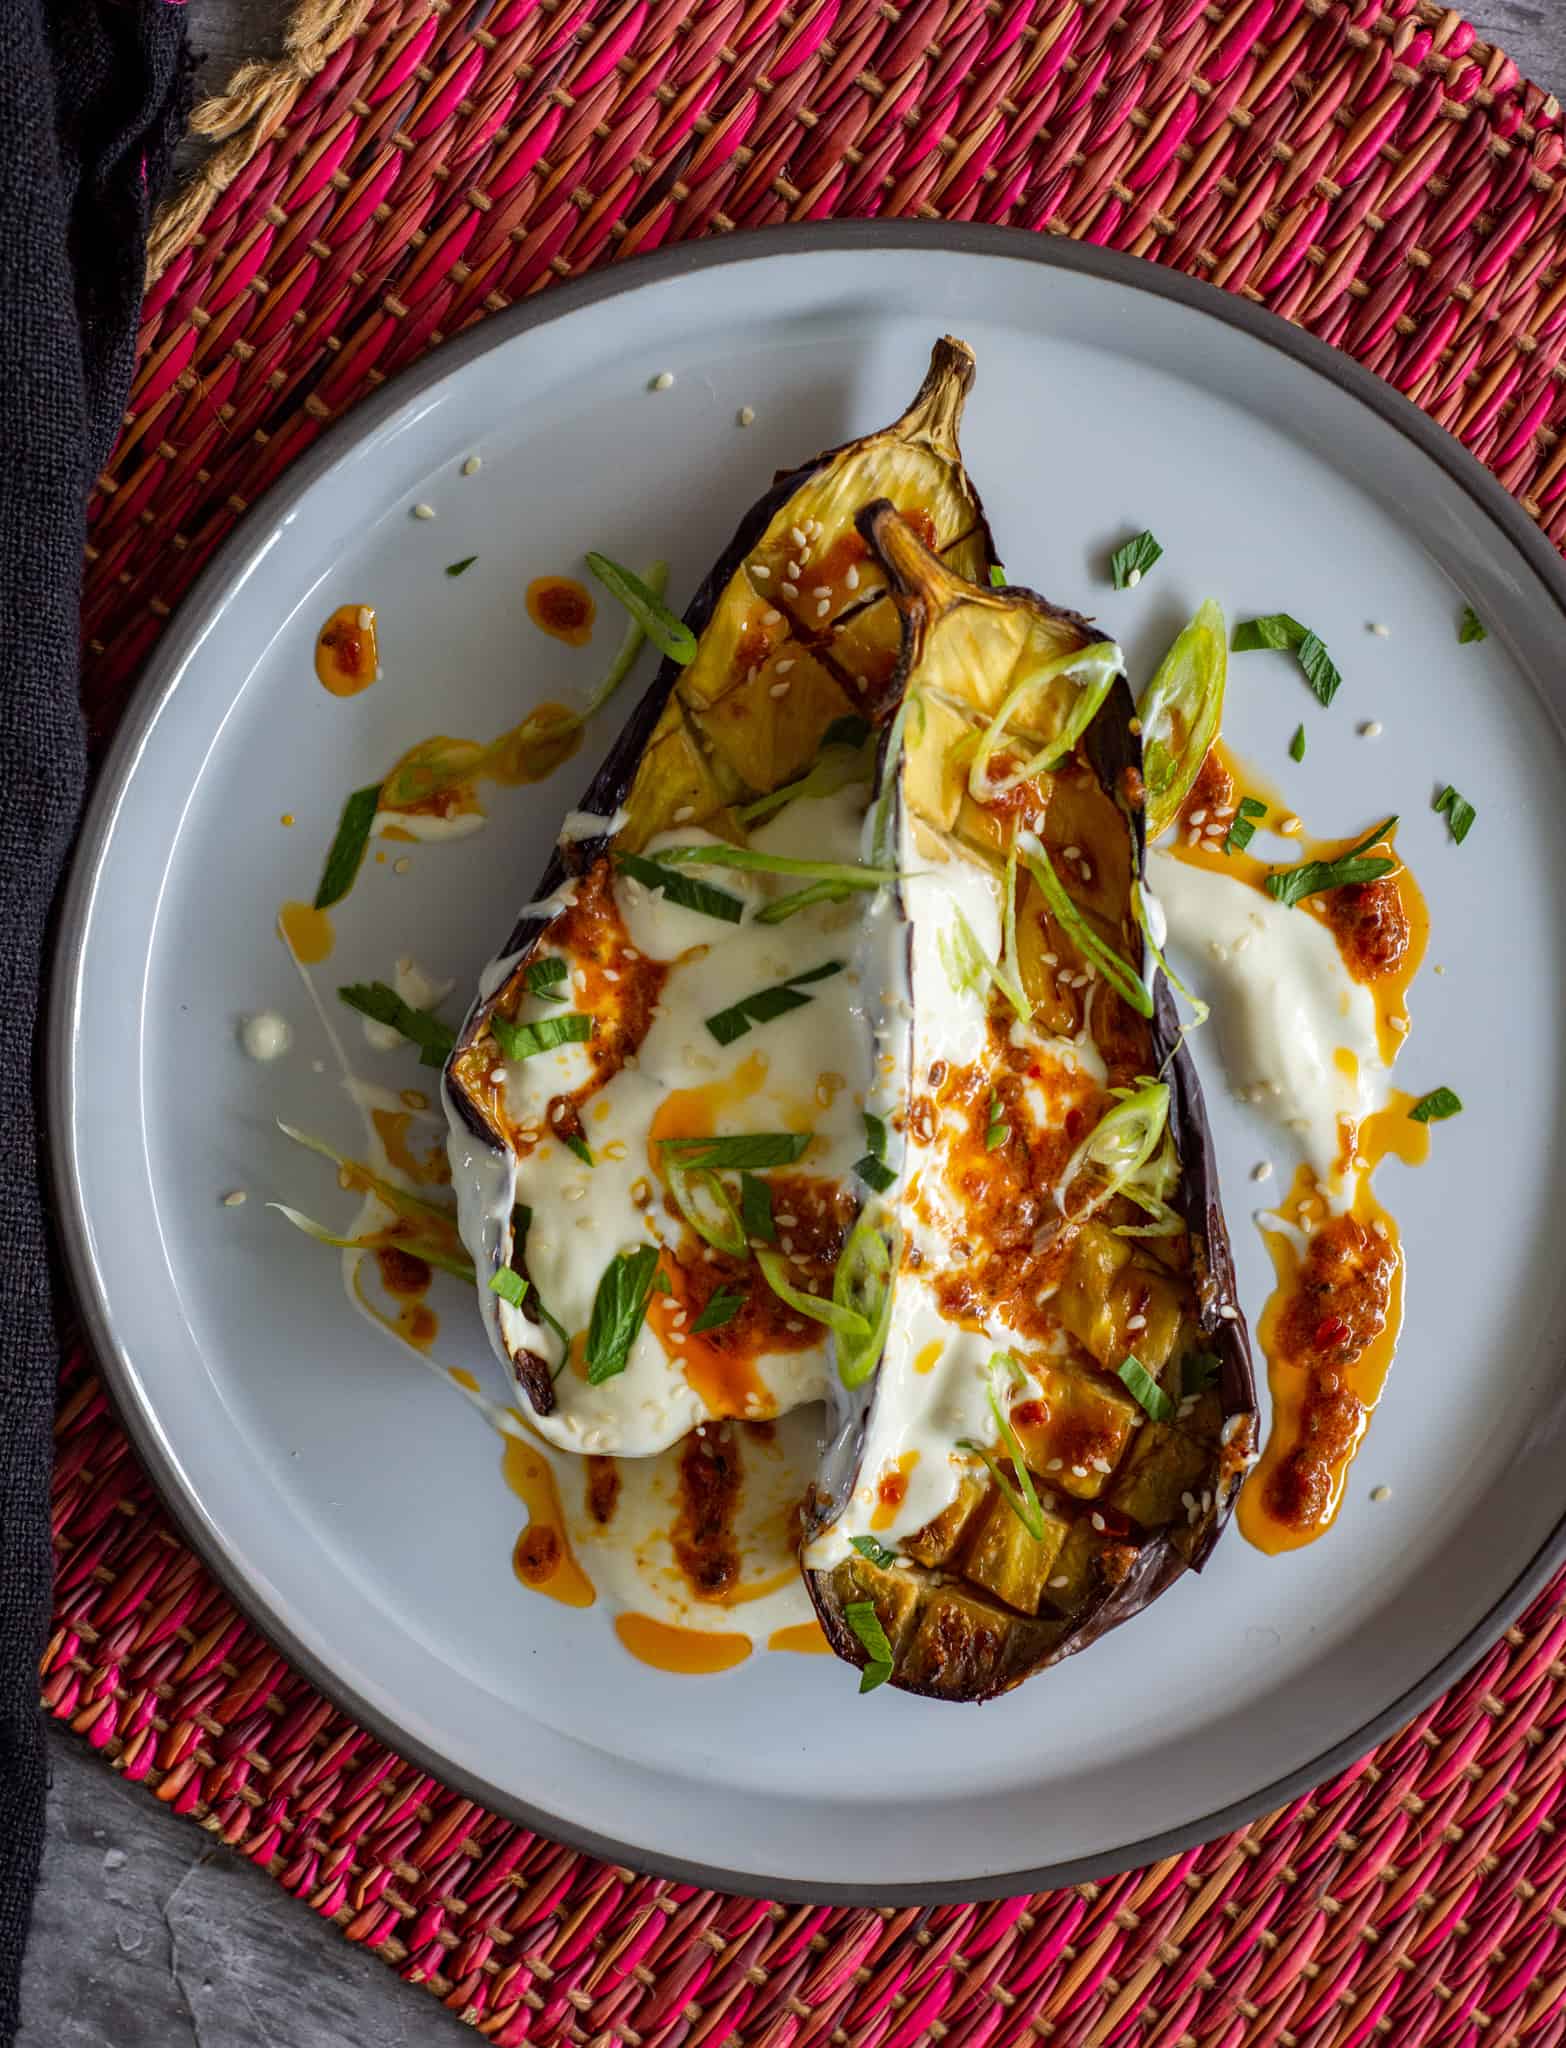 Roasted aubergine w/ harissa butter on a white plate